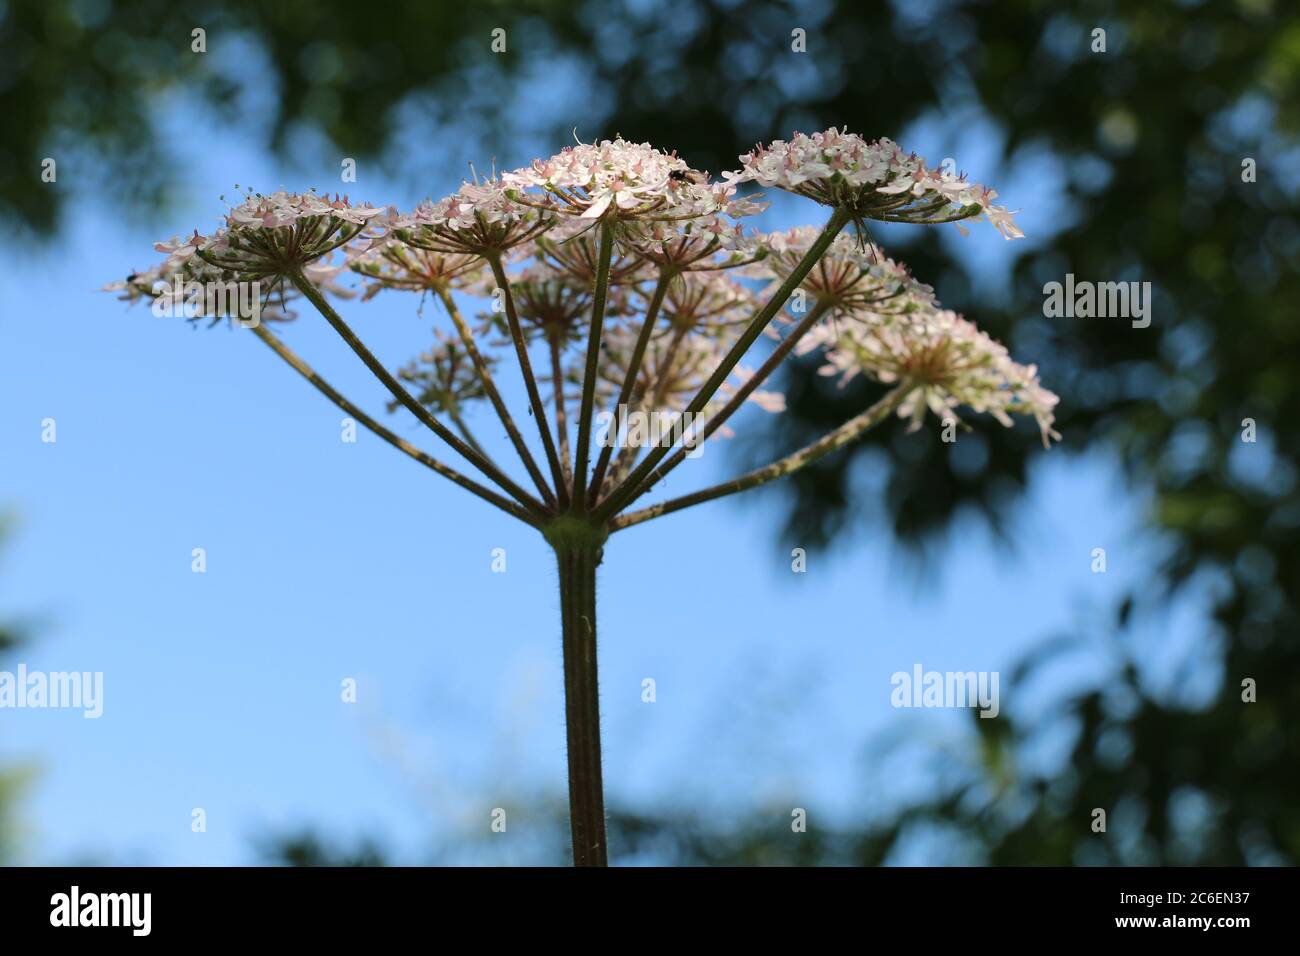 Pink Common Hogweed flower head, Heracleum sphondylium, Cow Parsnip, Eltrot, close-up side view flowering against a blue sky background Stock Photo